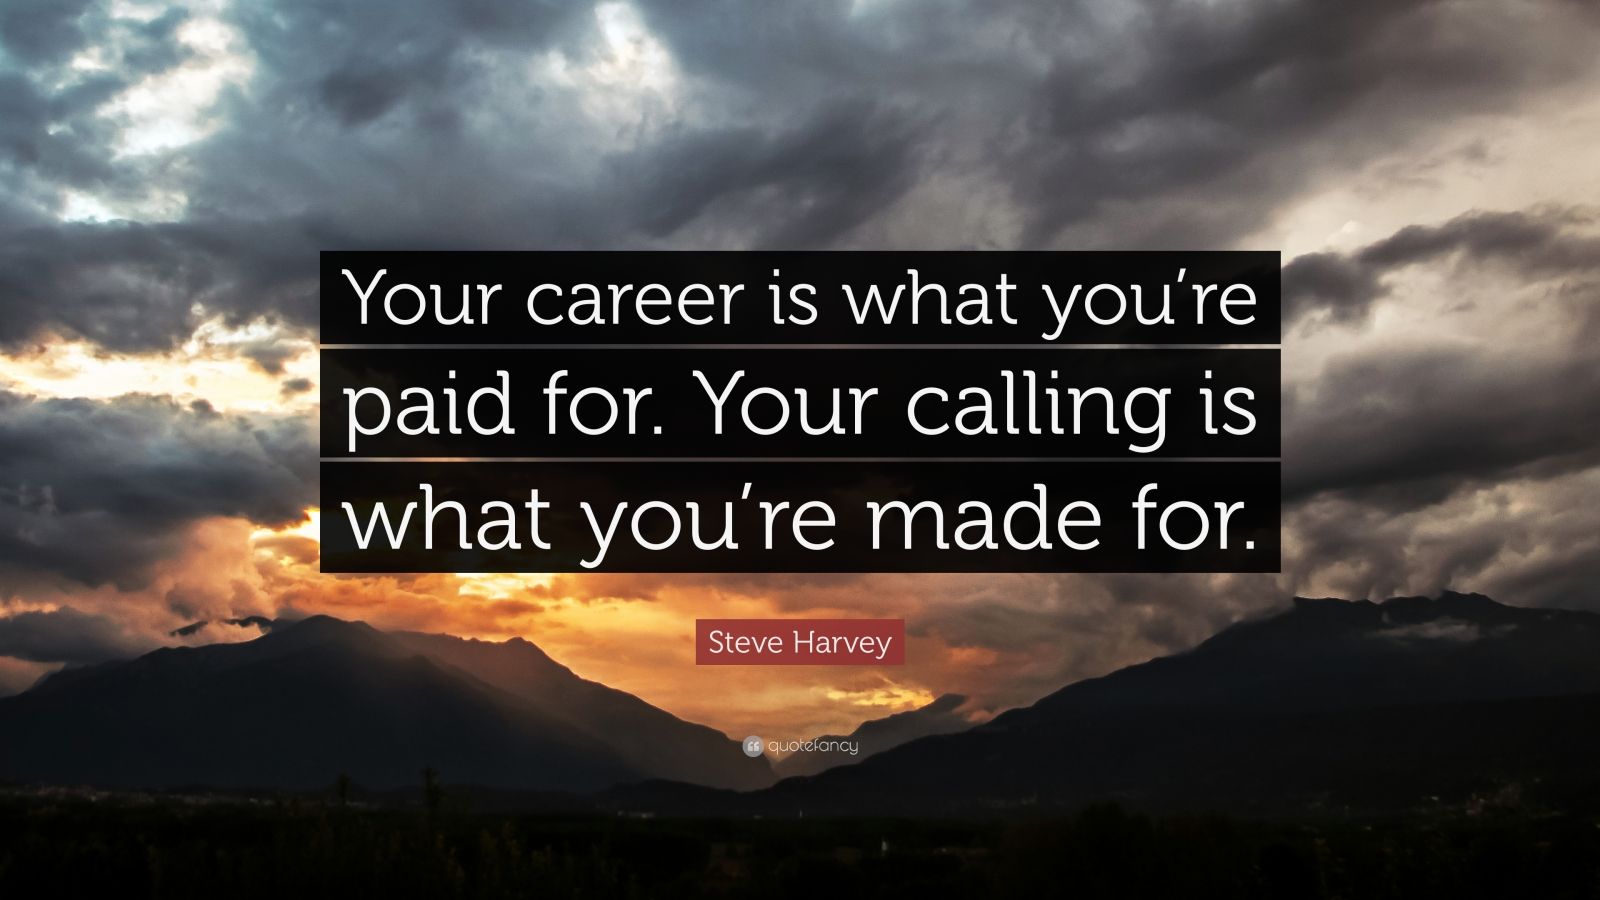 Steve Harvey Quote: “Your career is what you’re paid for. Your calling